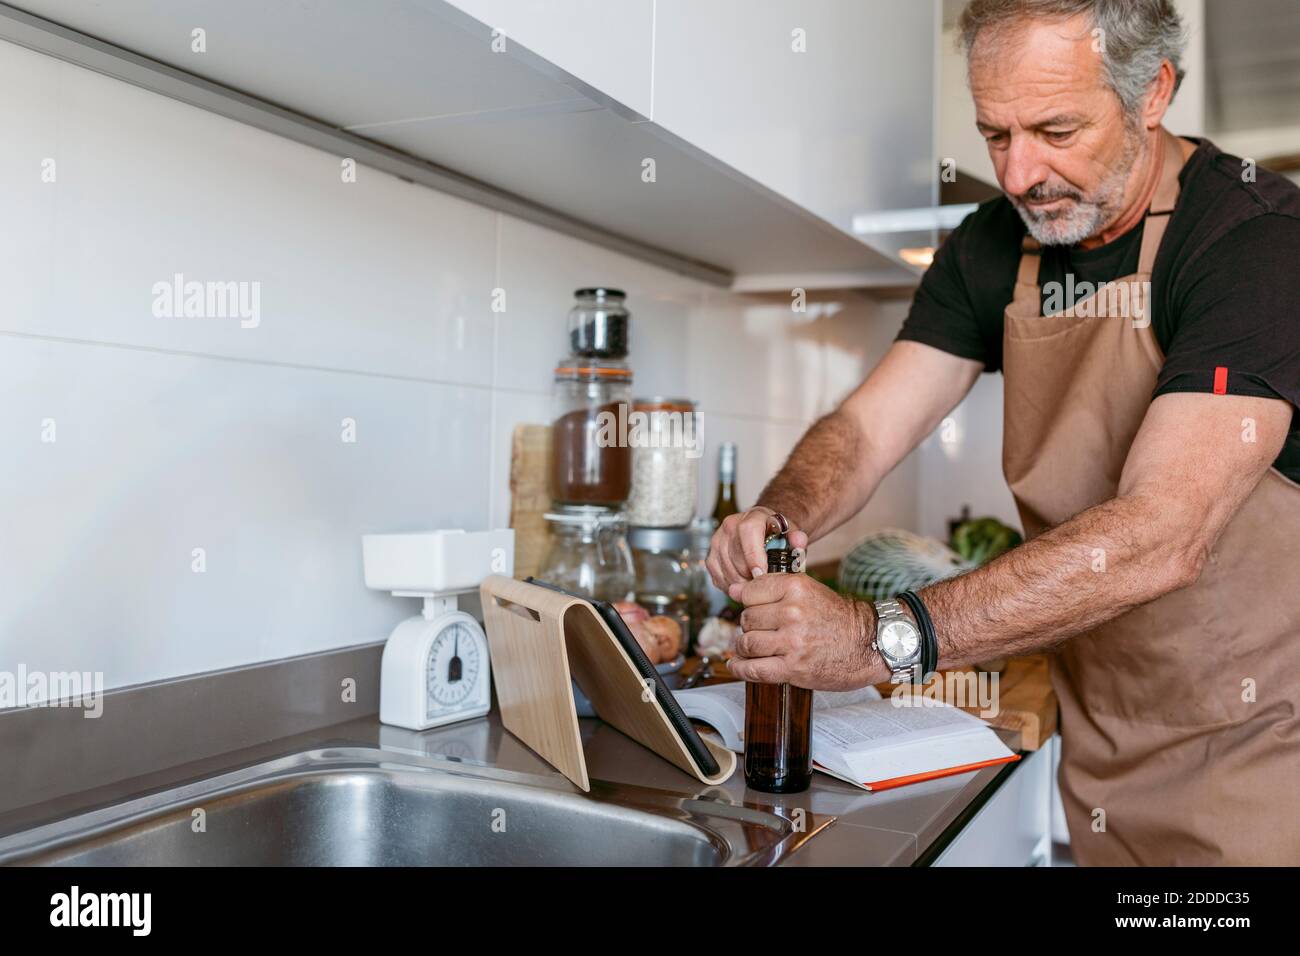 Mature man opening beer bottle while standing in kitchen Stock Photo